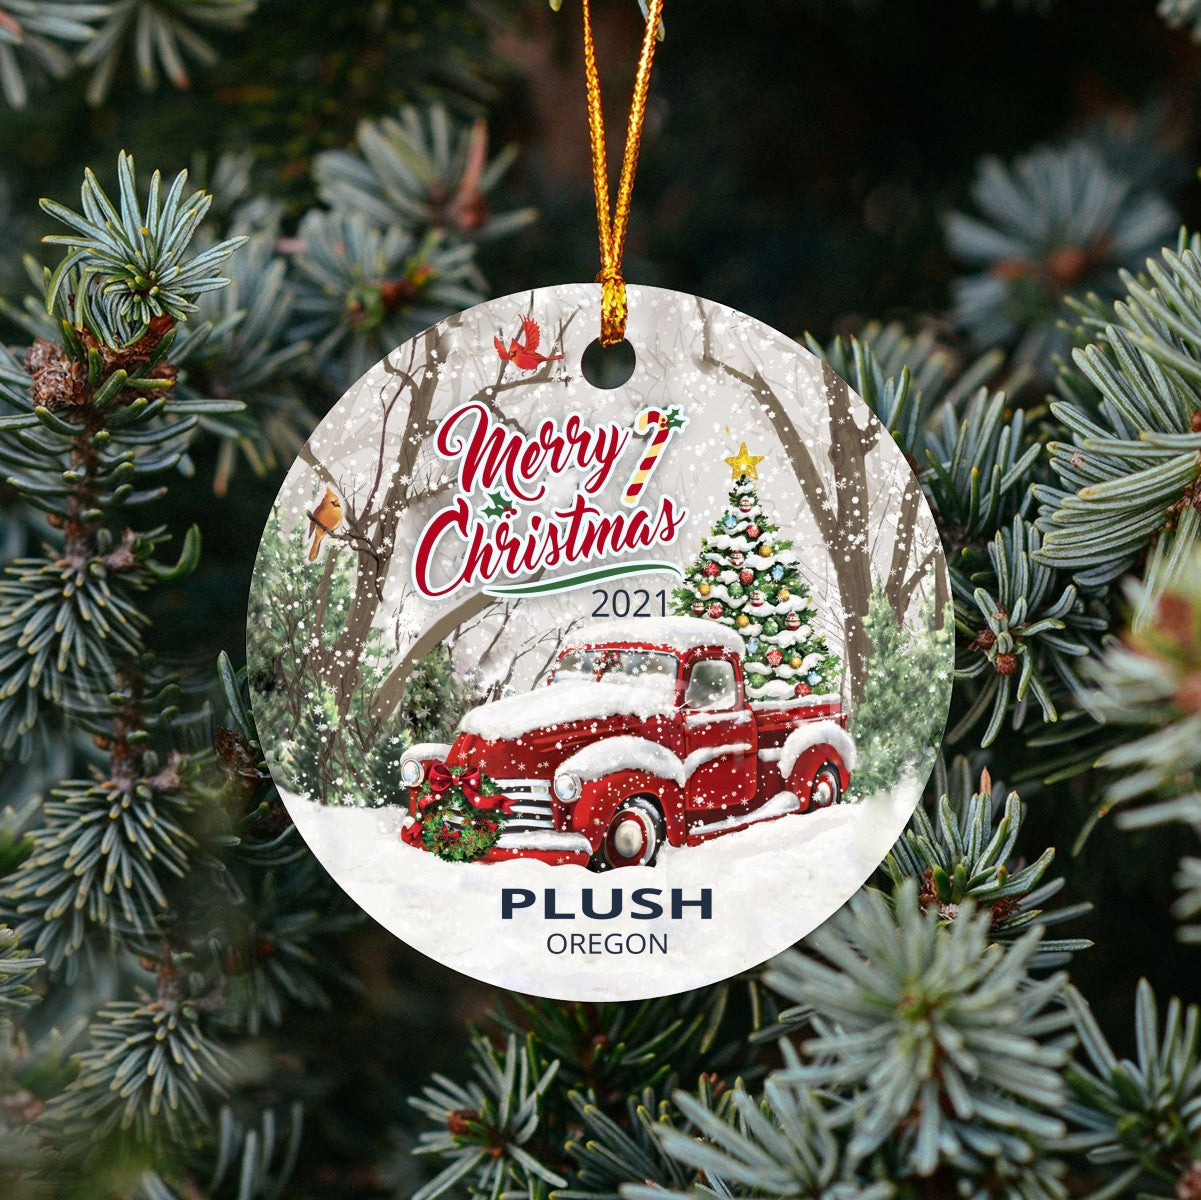 Christmas Tree Ornaments Plush - Ornament With Name City, State Plush Oregon OR Ornament - Red Truck Xmas Ornaments 3'' Plastic Gift For Family, Friend And Housewarming